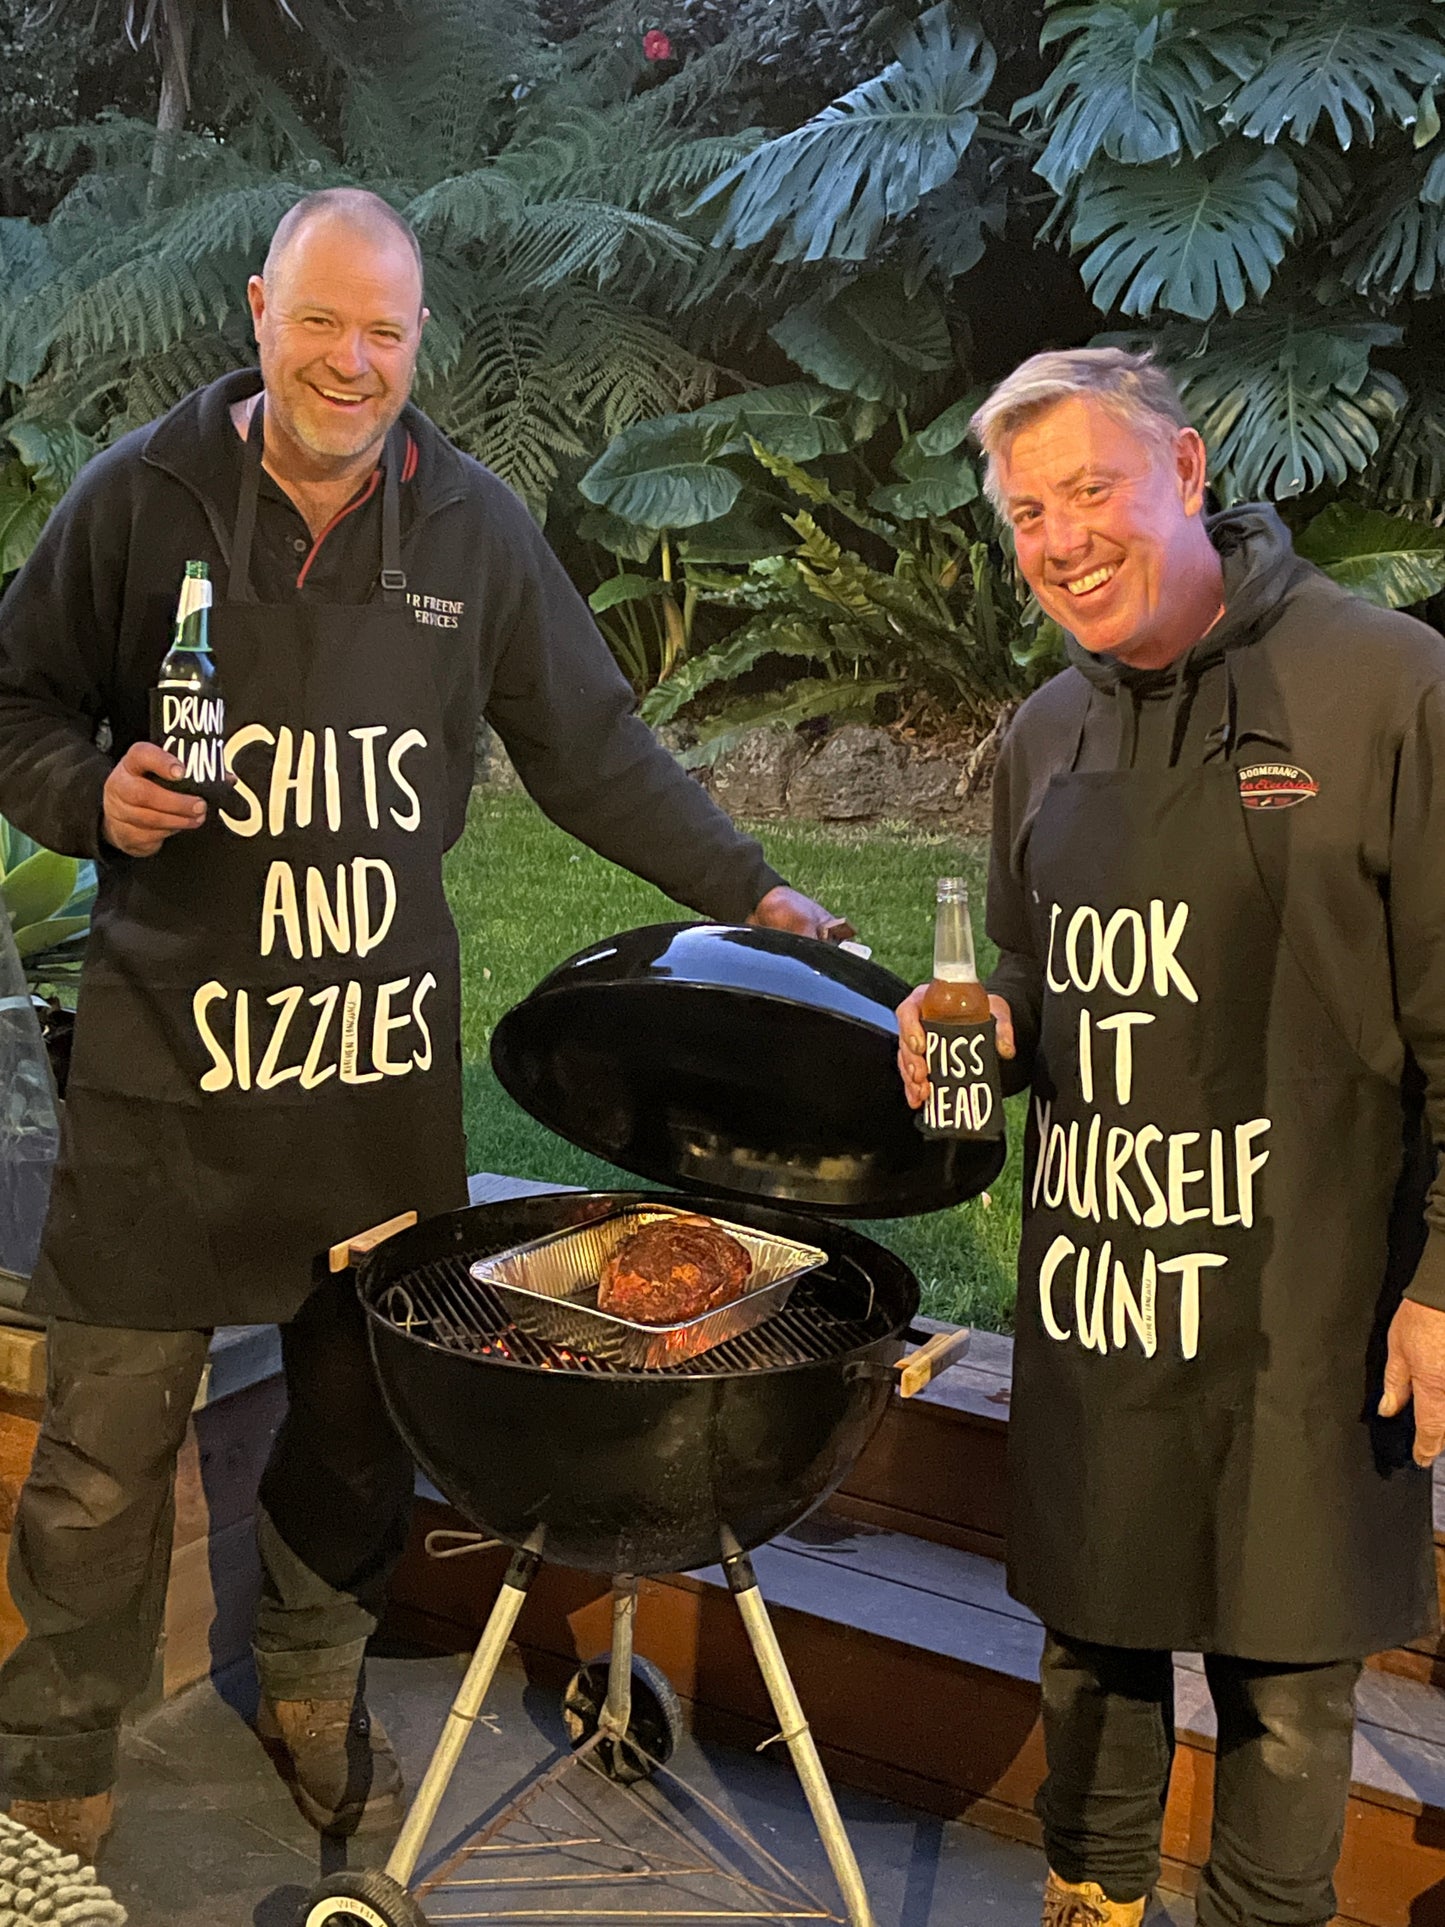 Cook It Yourself Cunt - BBQ apron - Kitchen Language